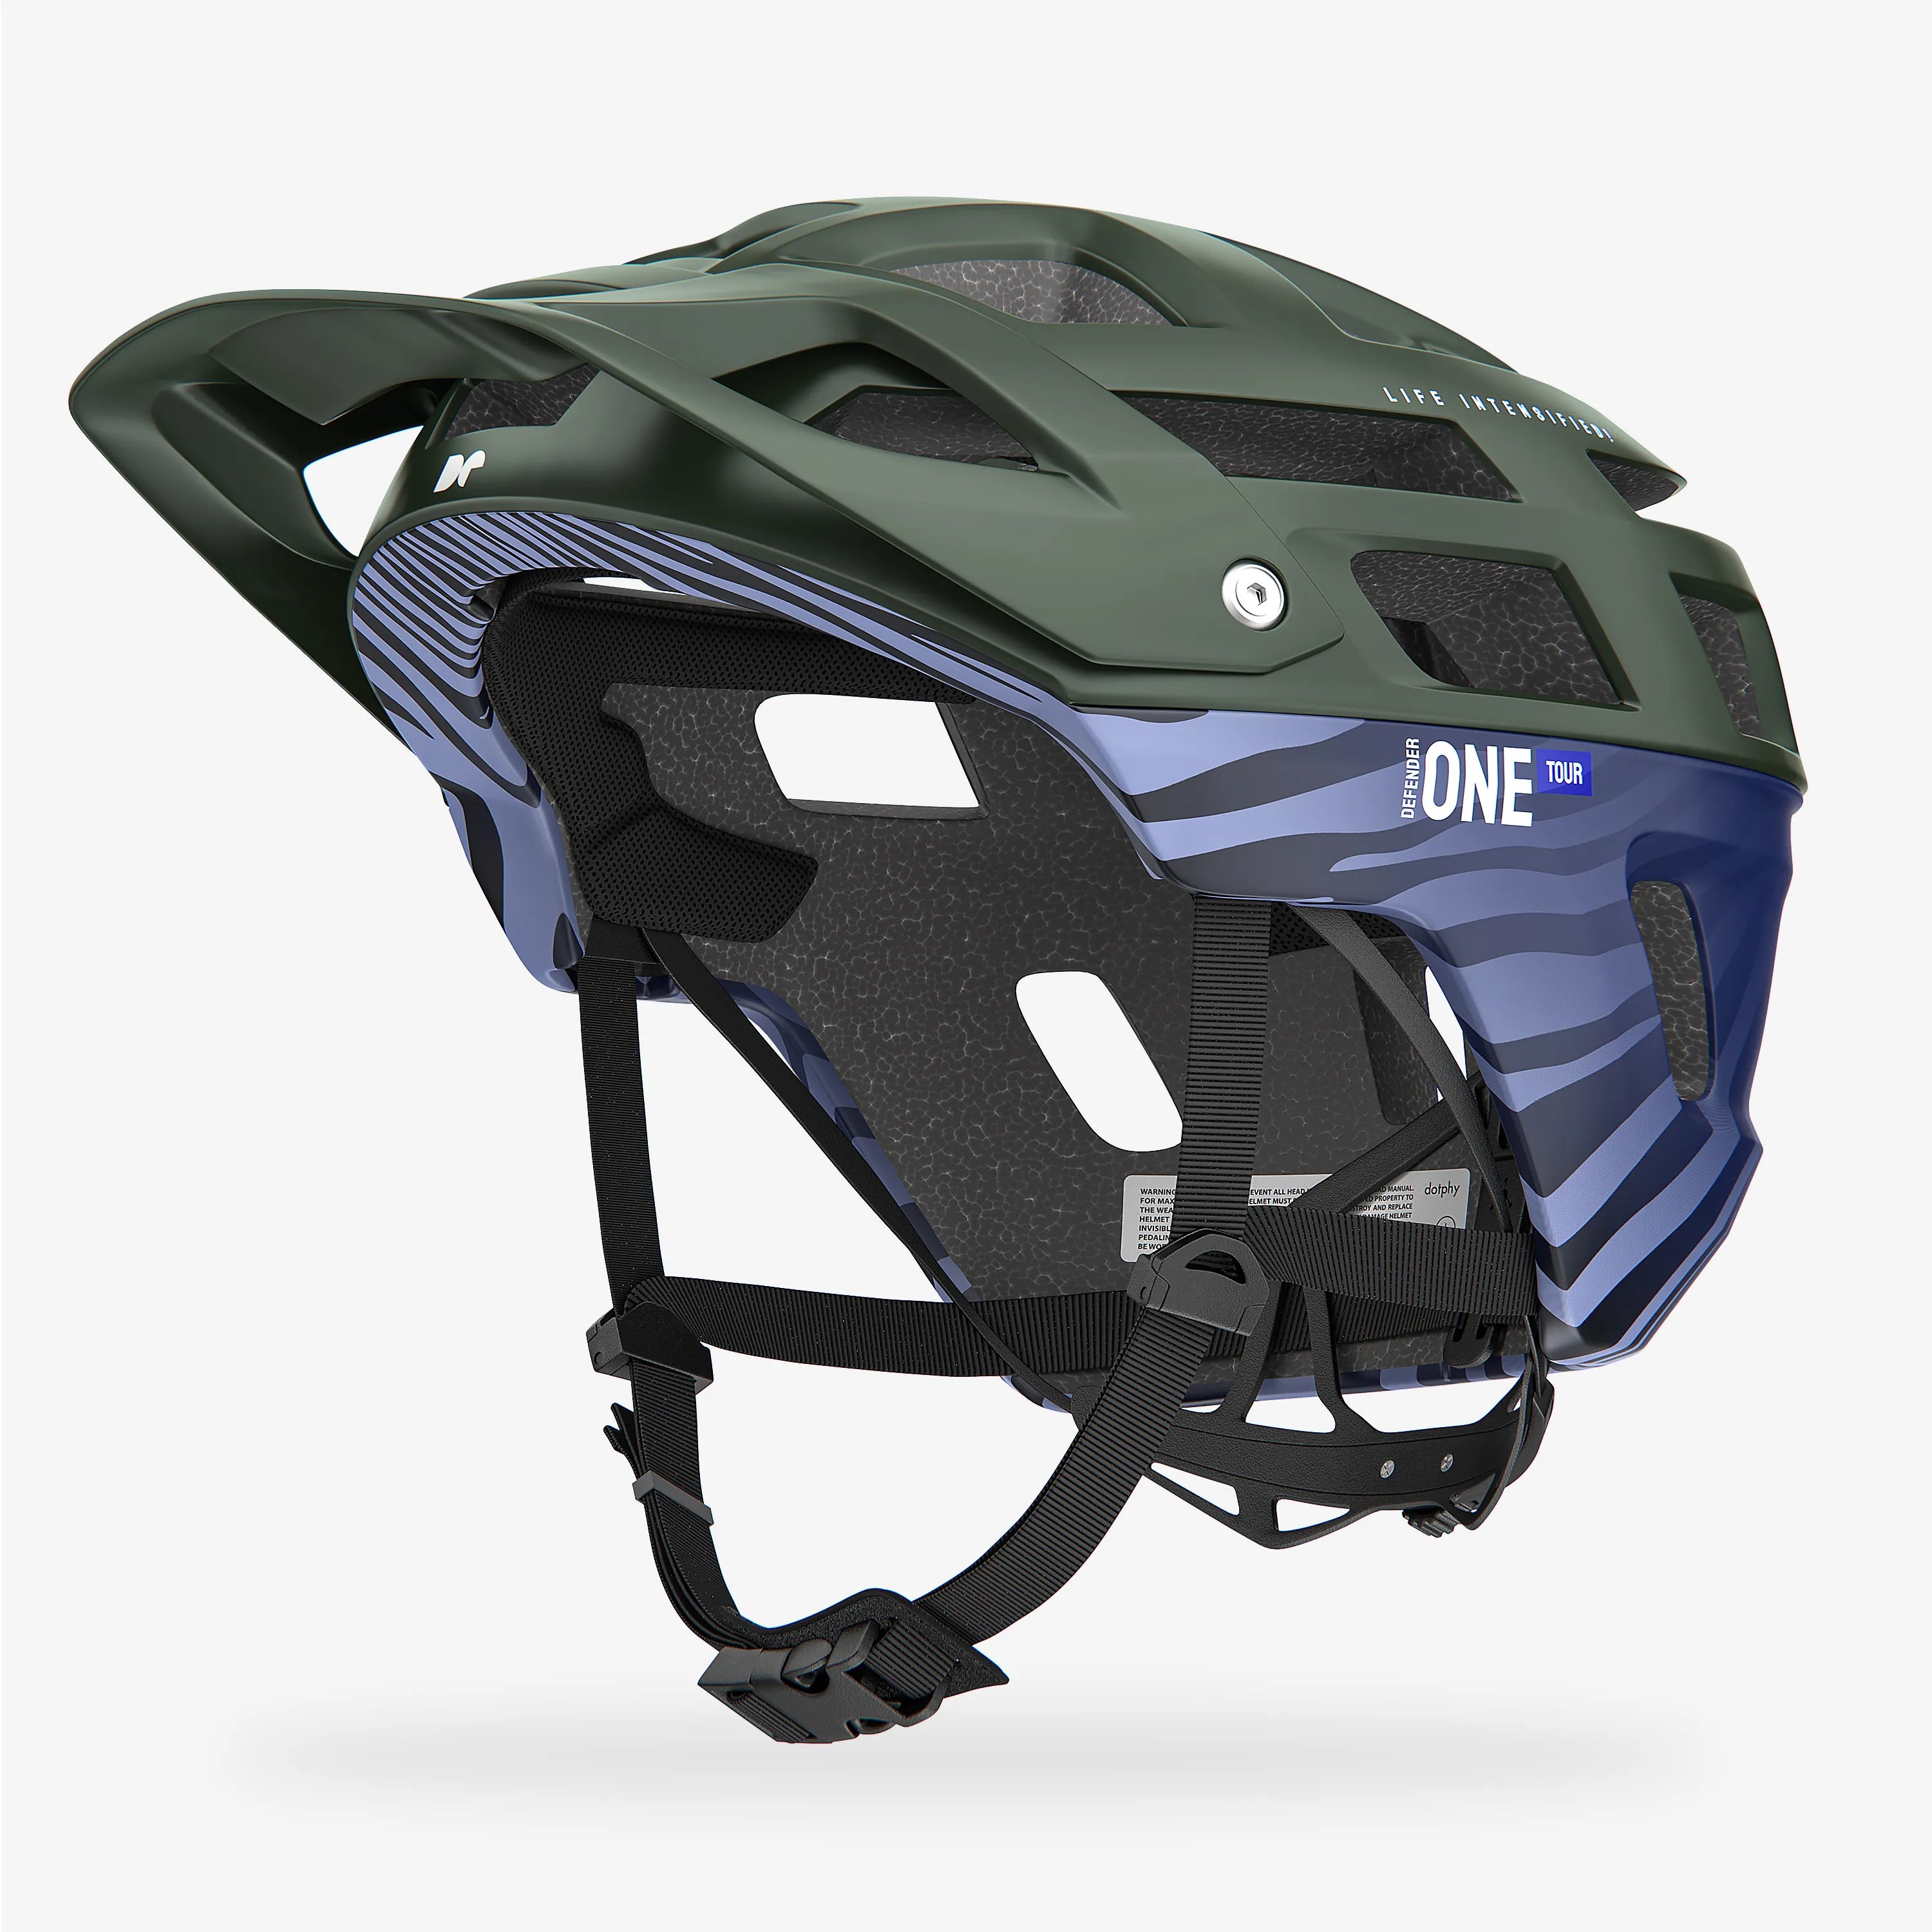 Defender One Tour Forest Green Mountain Bike Helmet フォレストグリーン マウンテンバイクヘルメット